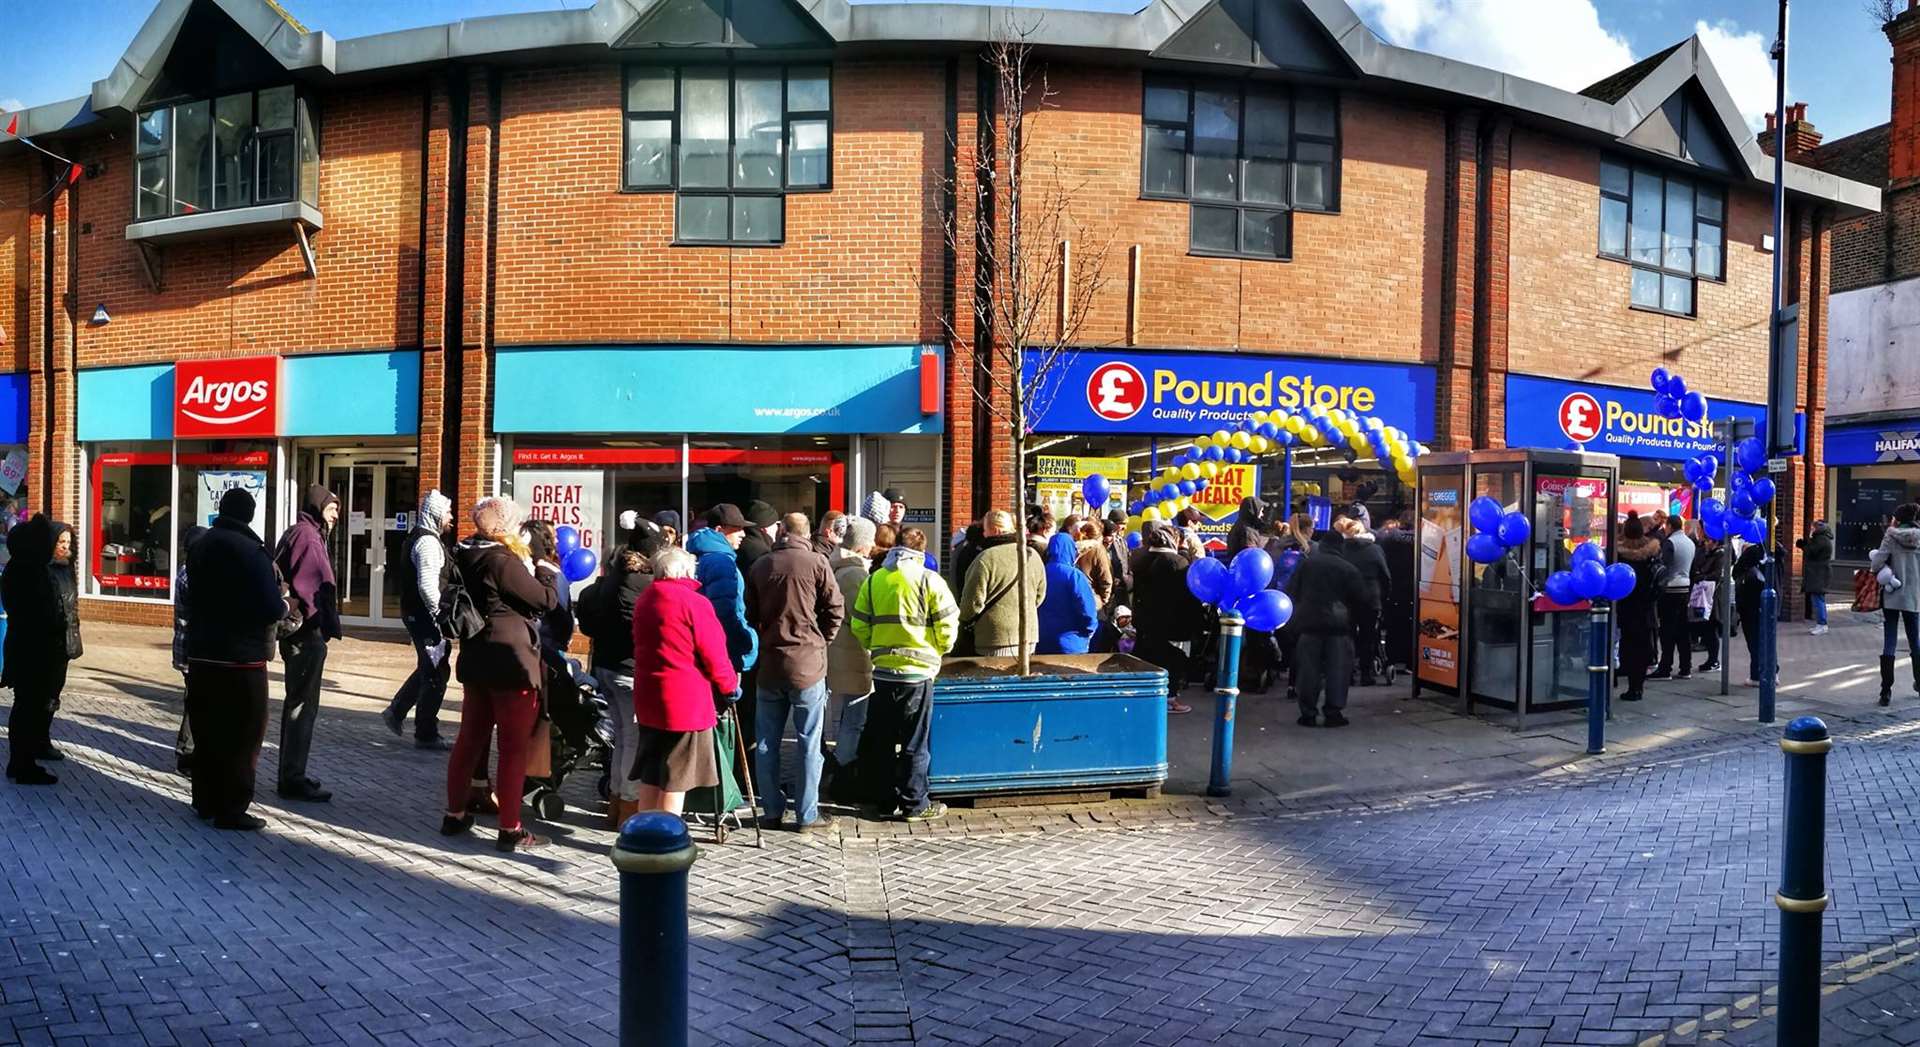 People queued in -2c temperatures to be the first into the new pound store. Picture: Yav Zare